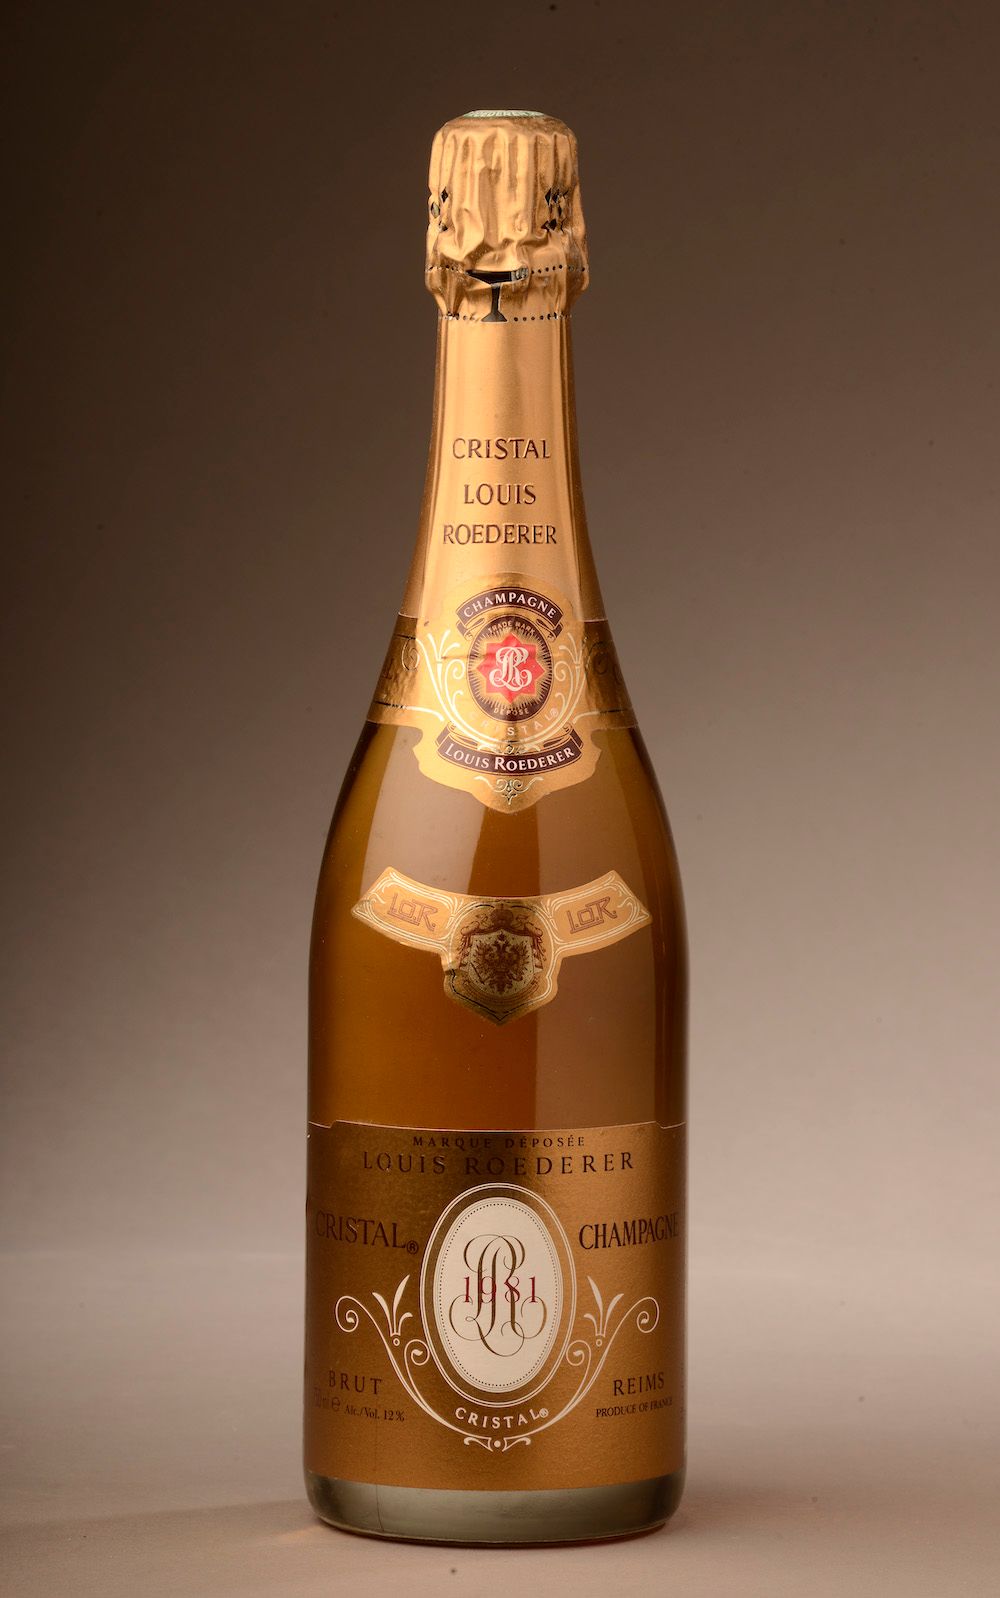 Null 1 Flasche CHAMPAGNE "Cristal", L. Roederer 1981